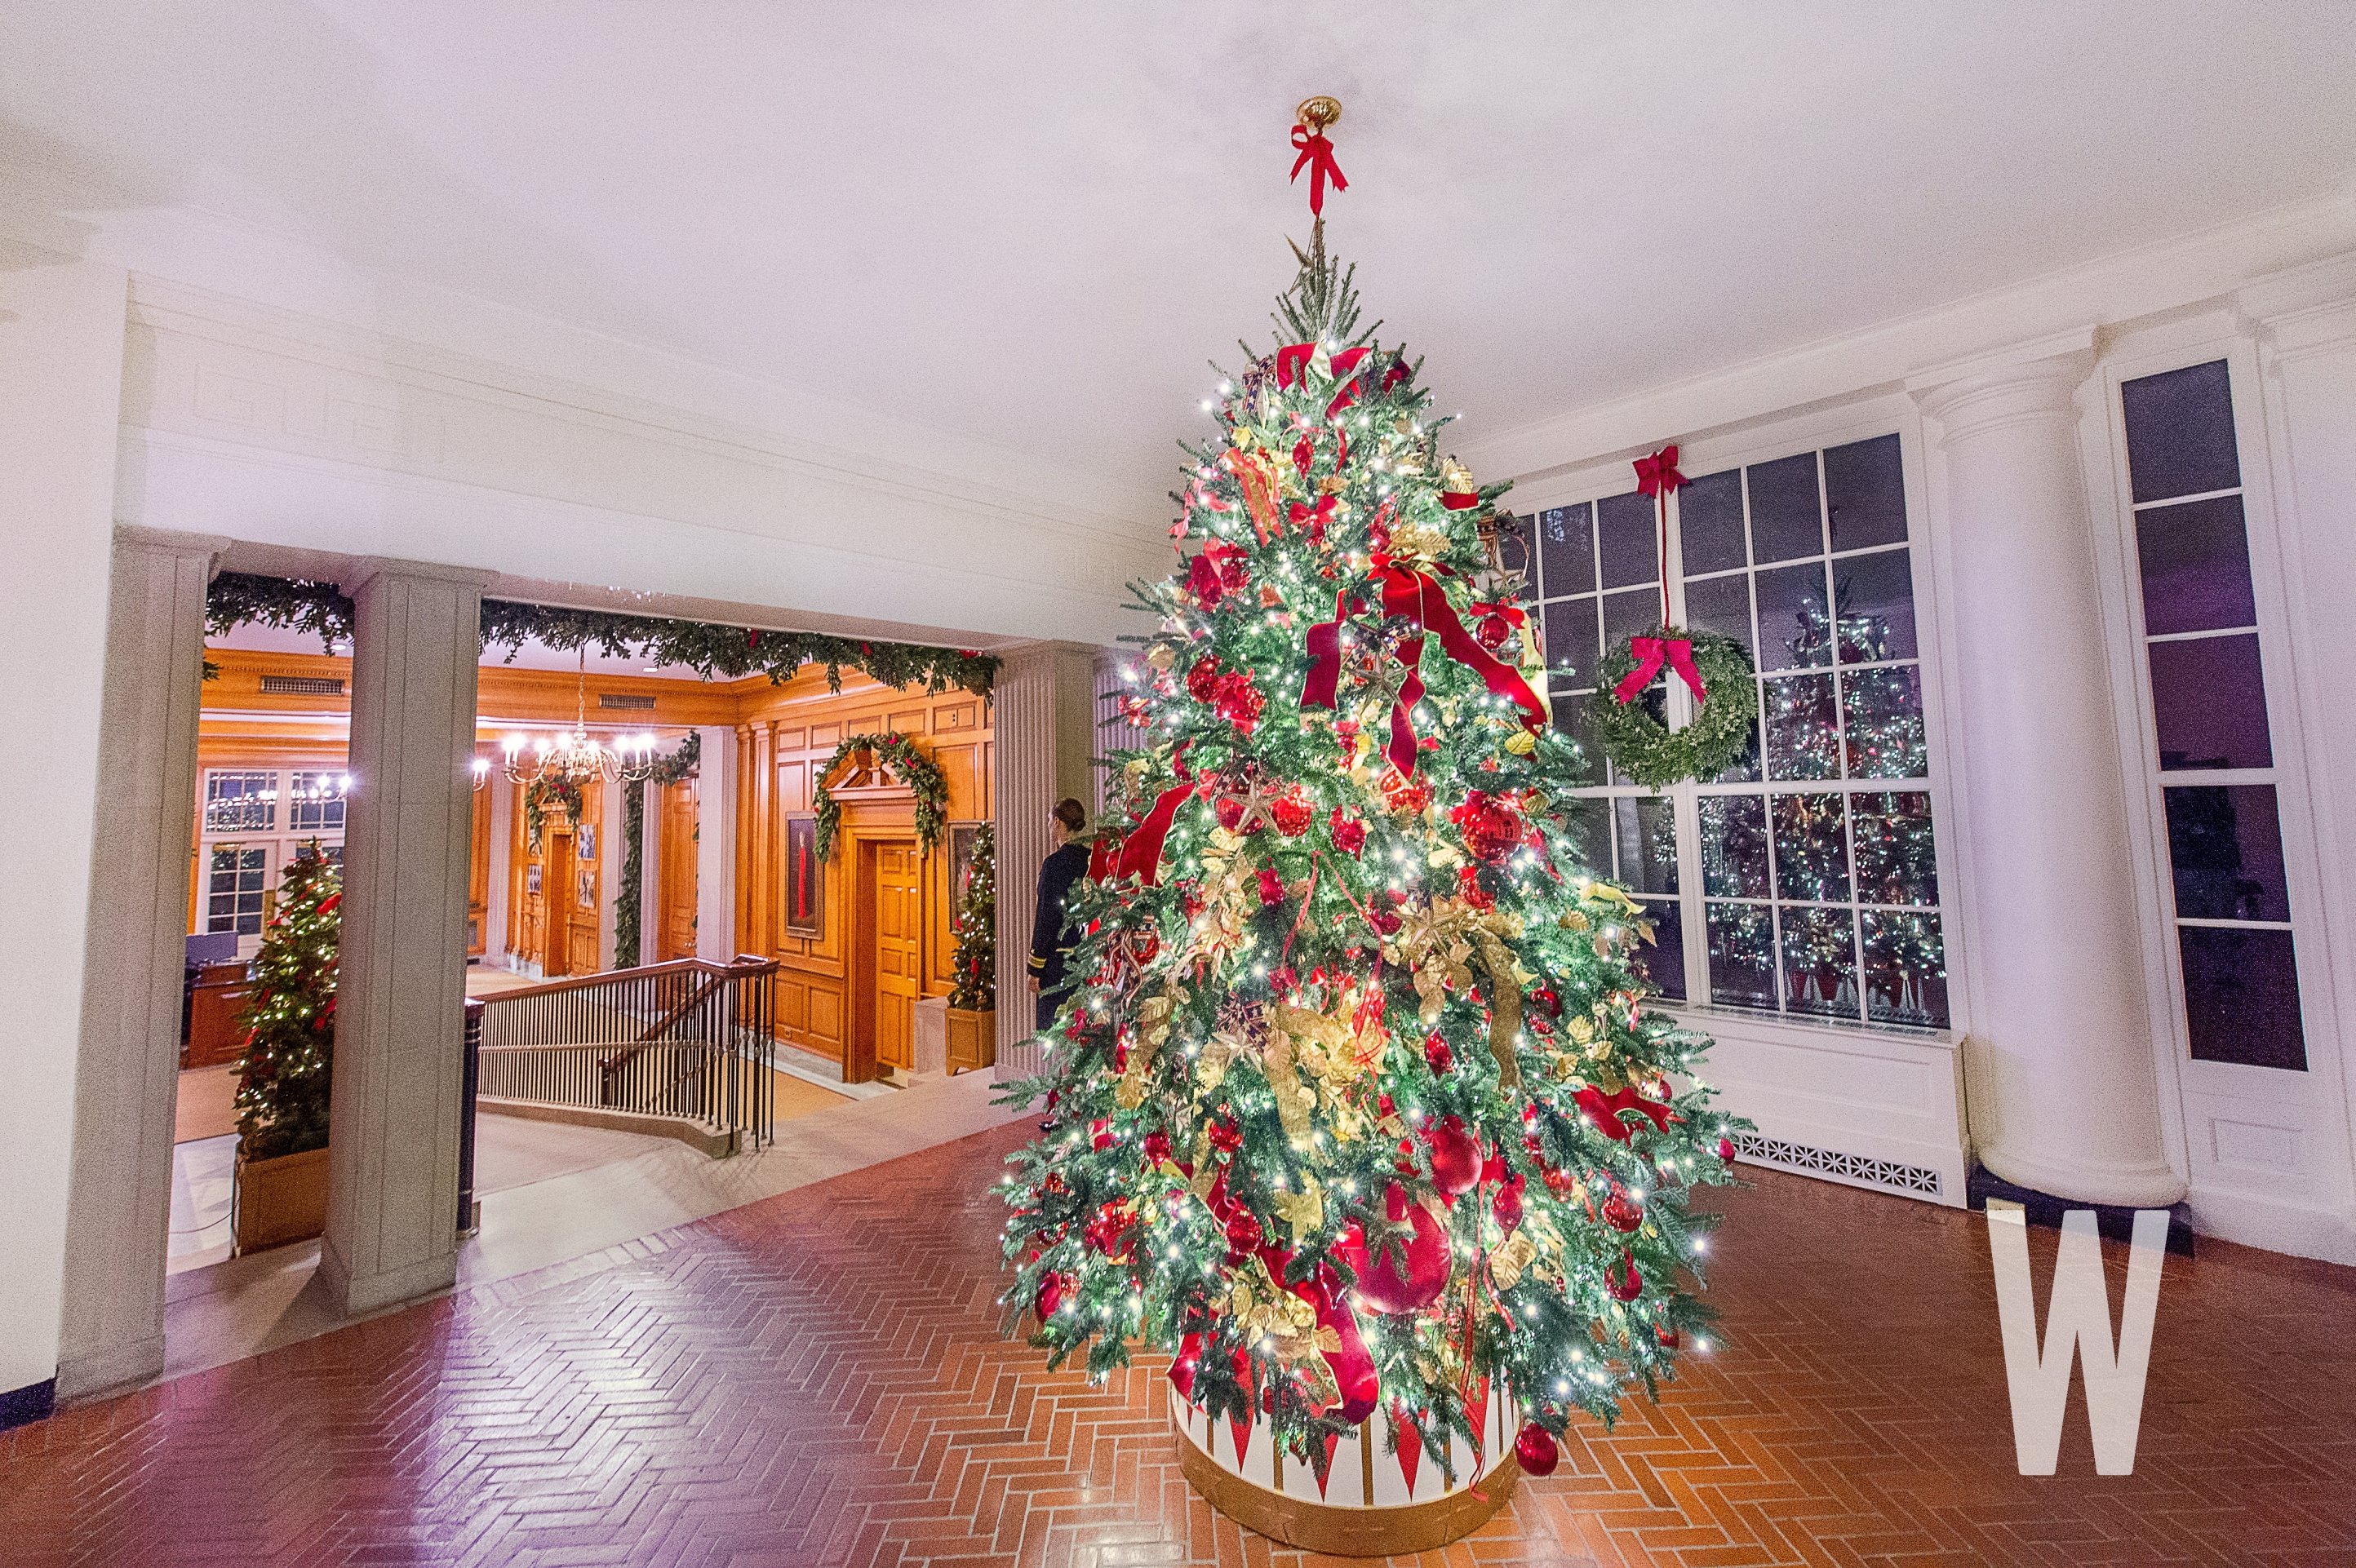 PHOTOS: The 2019 White House Christmas Decorations